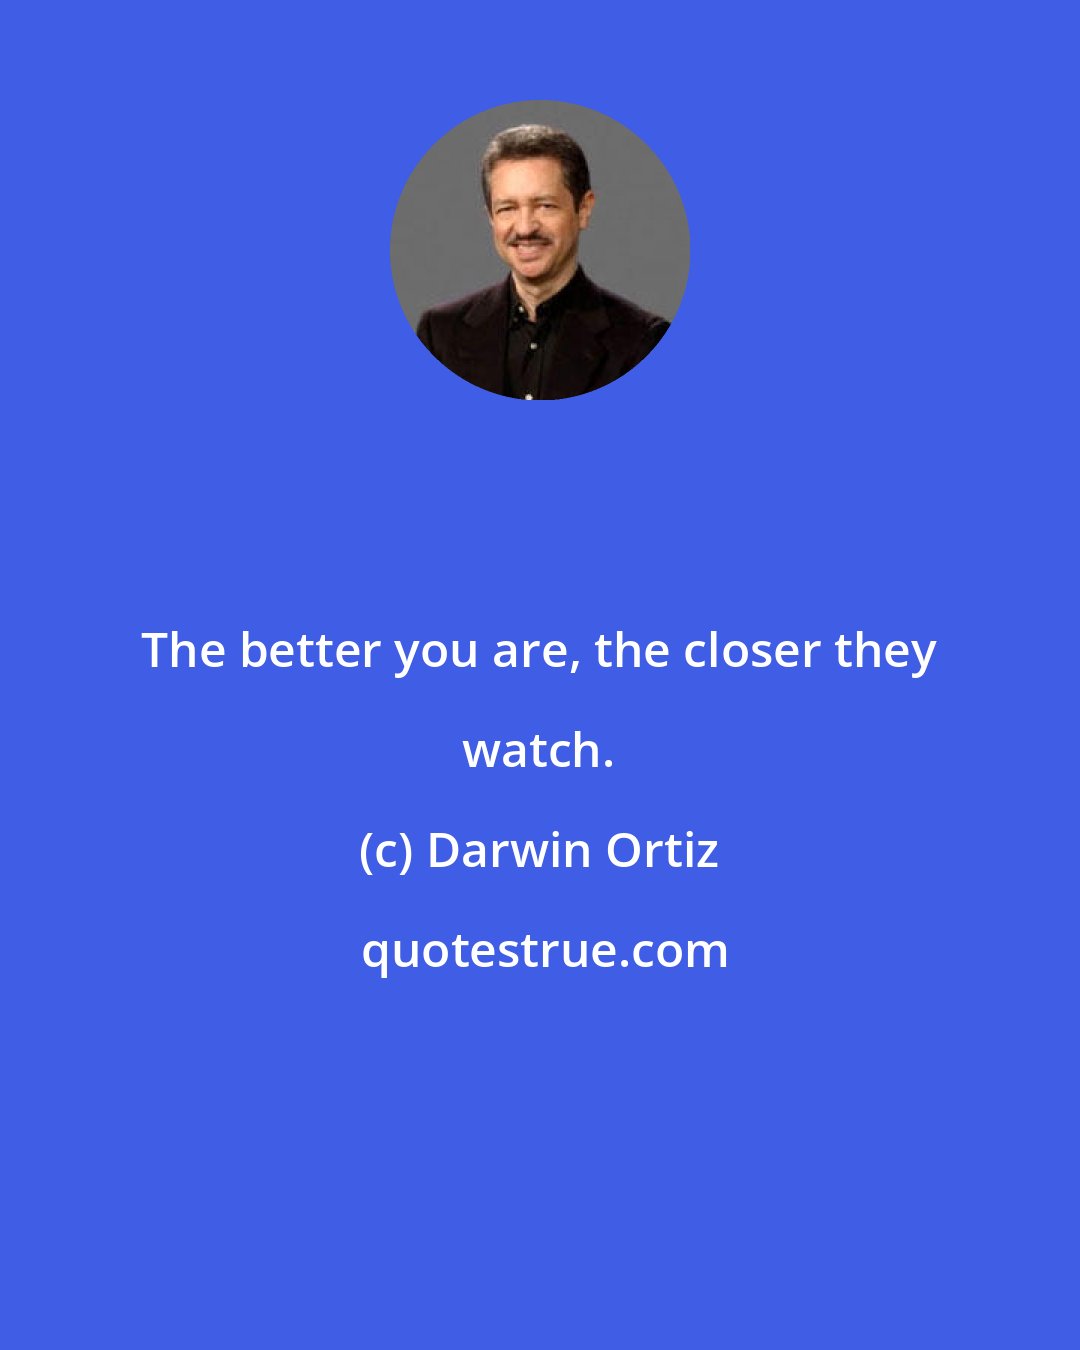 Darwin Ortiz: The better you are, the closer they watch.